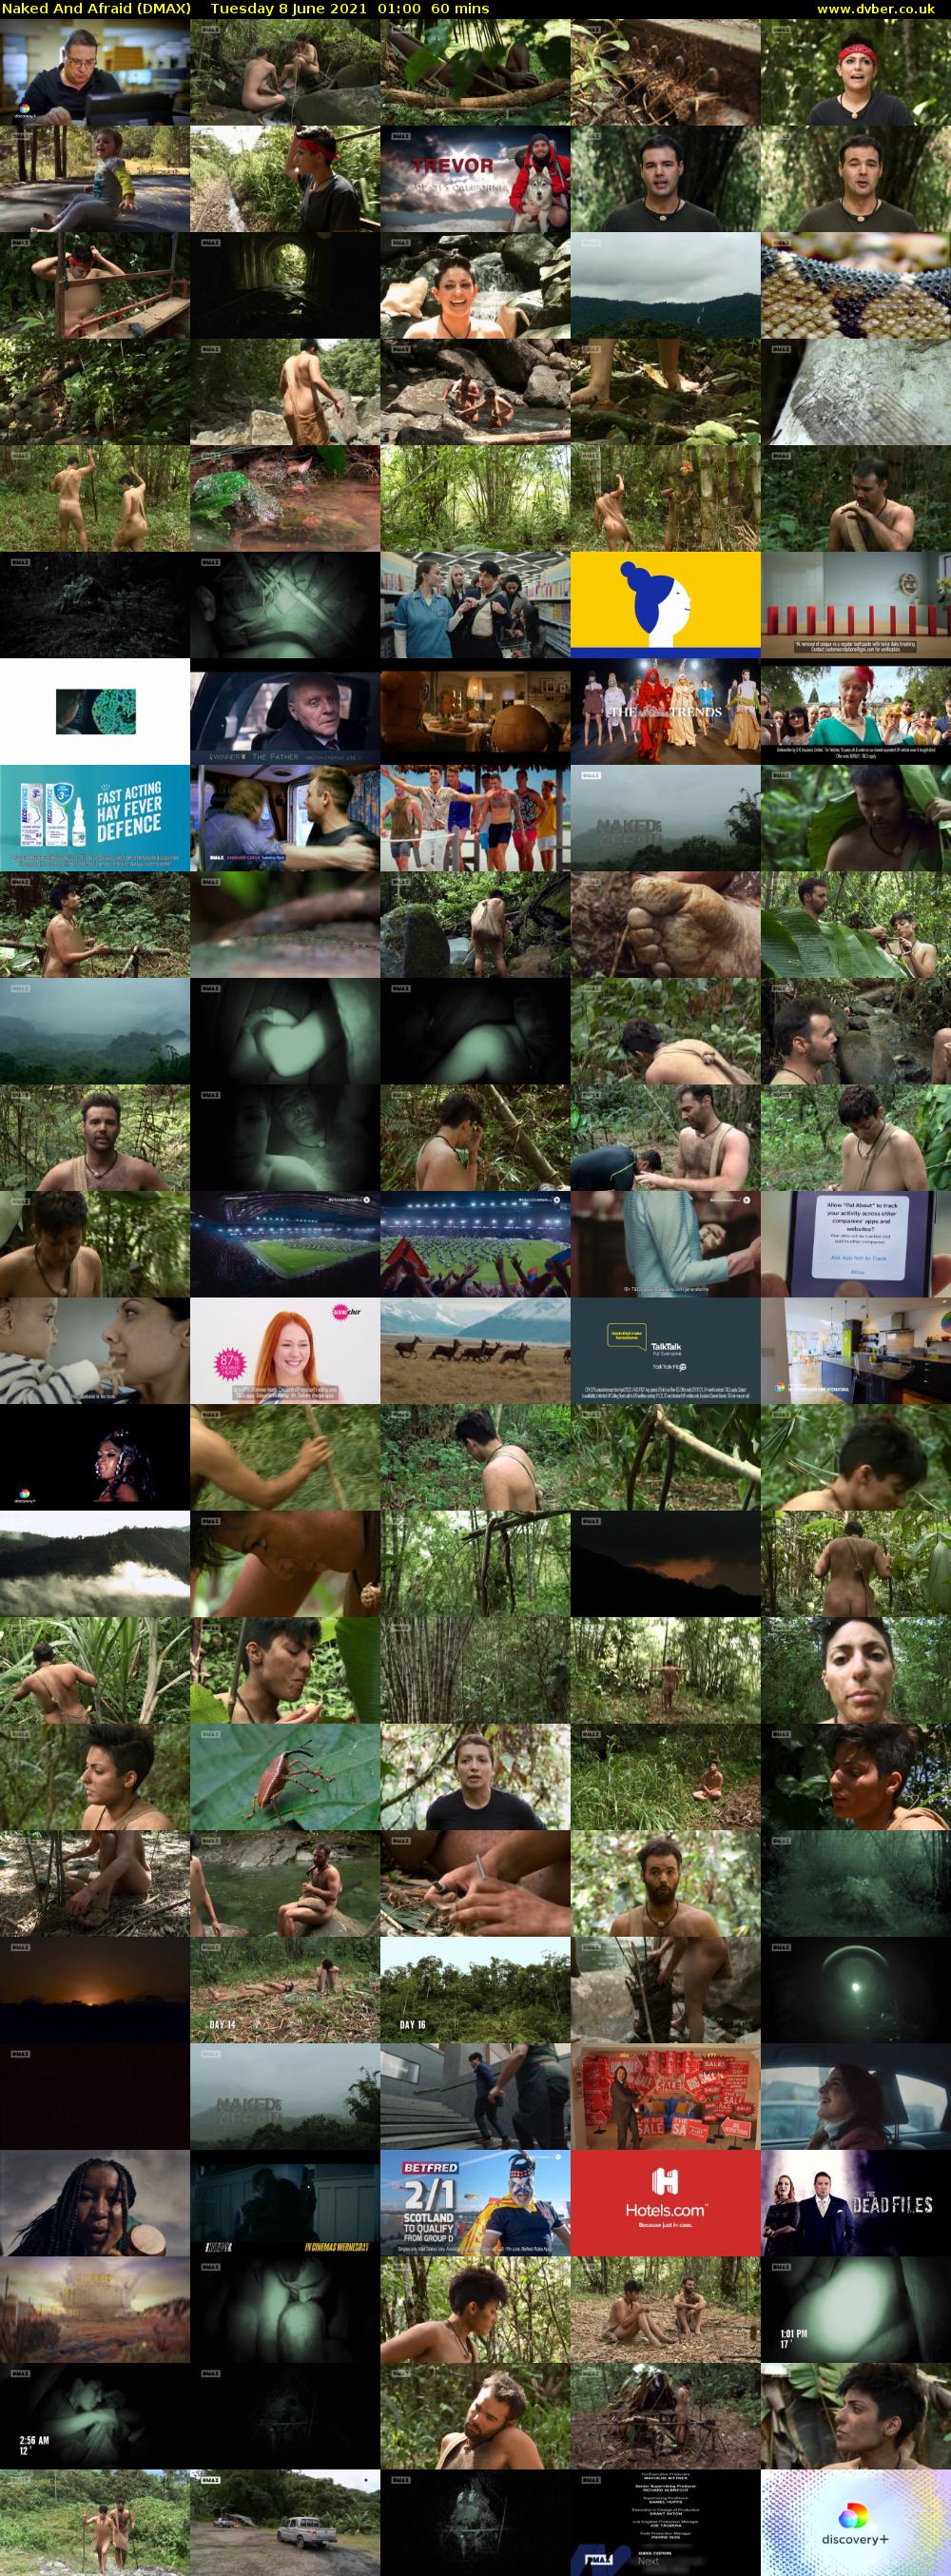 Naked And Afraid (DMAX) Tuesday 8 June 2021 01:00 - 02:00